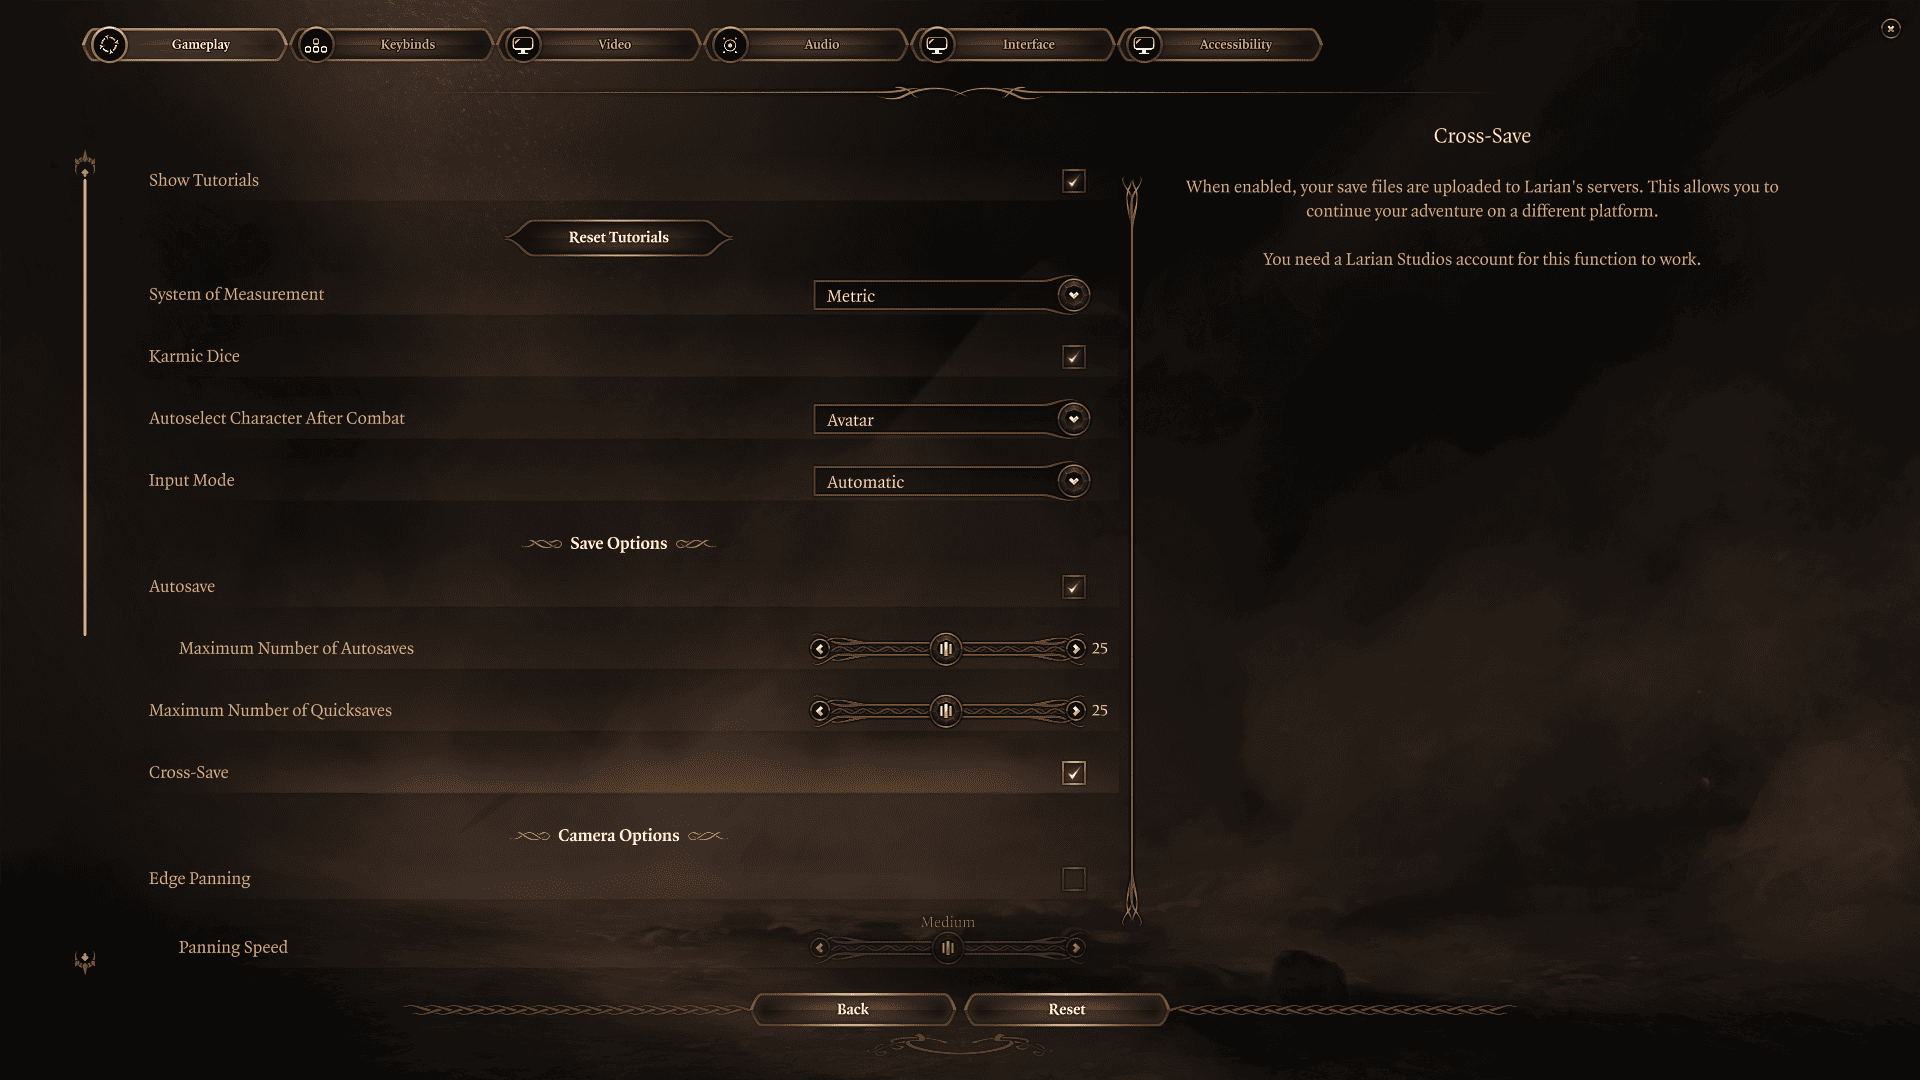 Baldur's Gate 3 how to cross save: An image of the in-game settings.